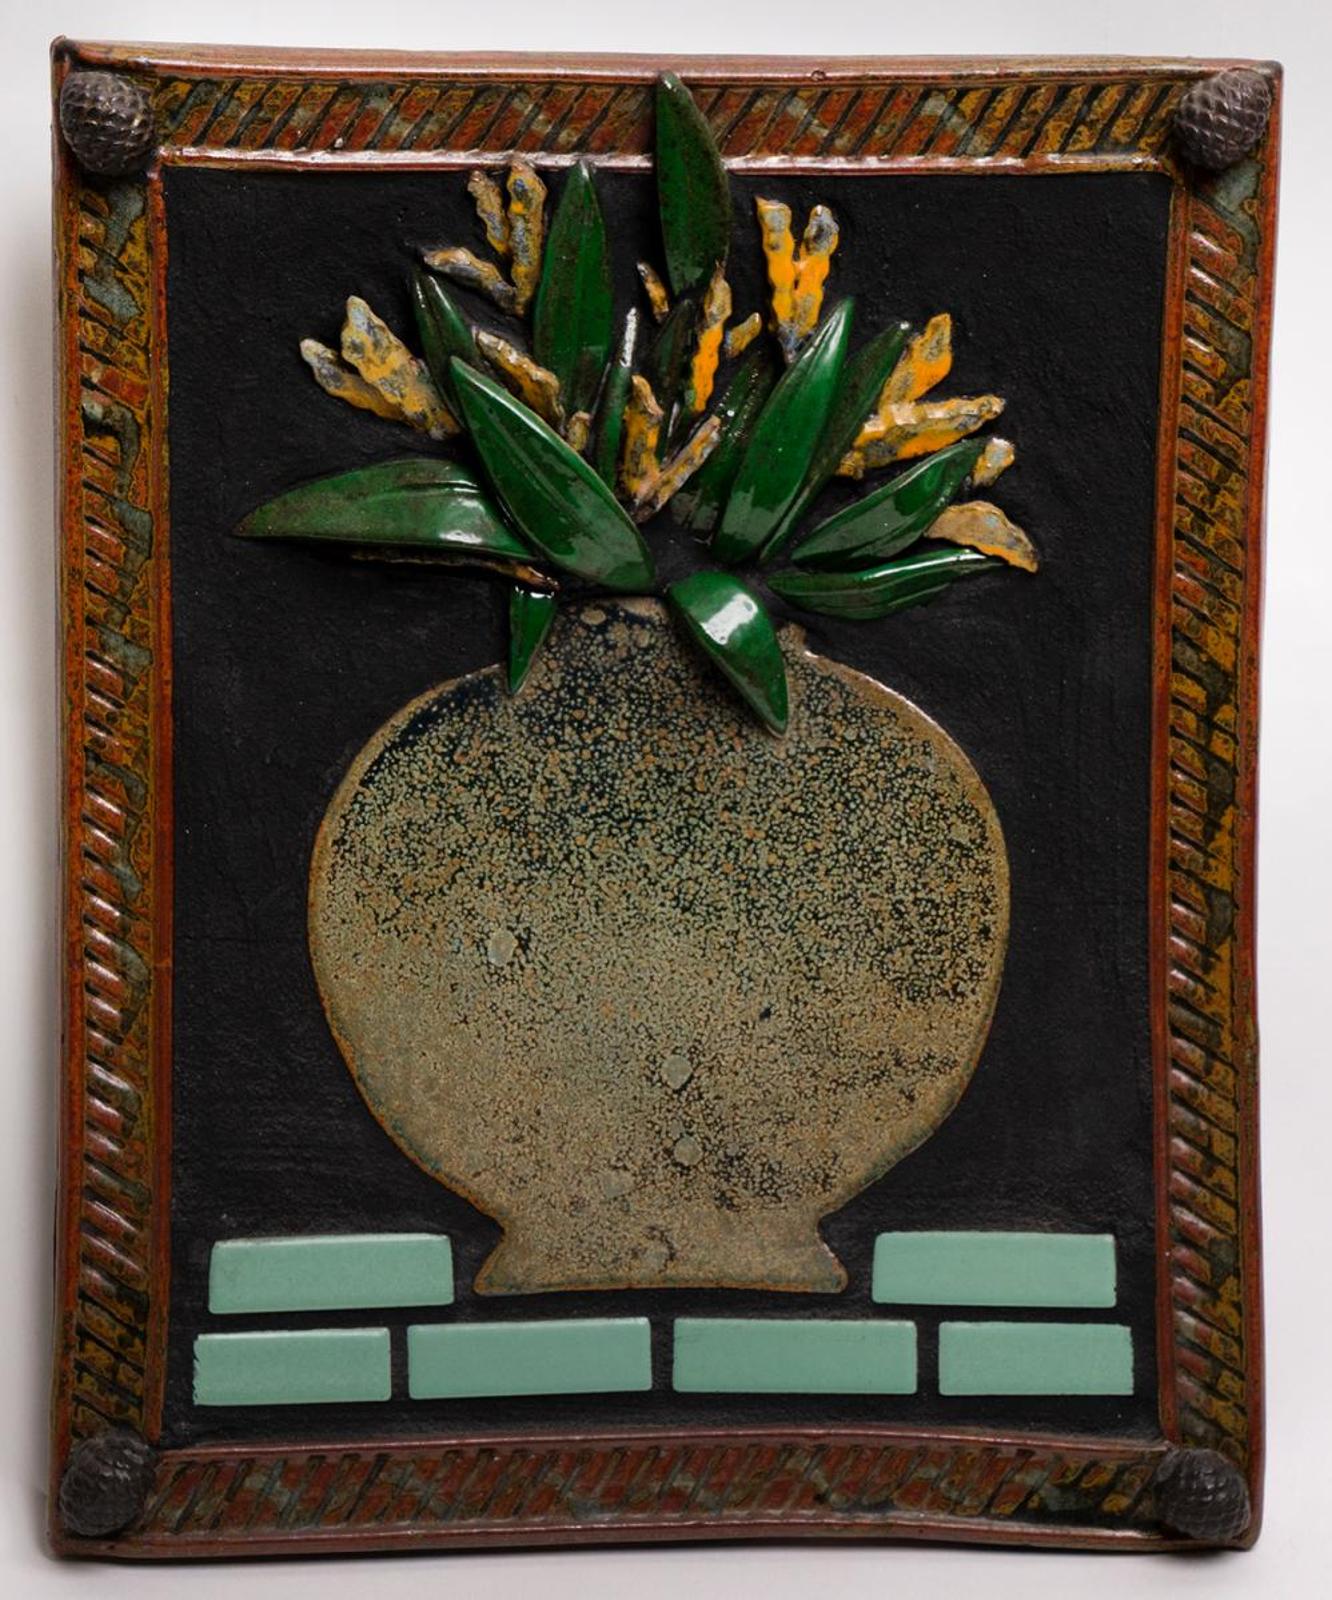 Charley Farrero (1946) - Untitled - Plaque With Flowers